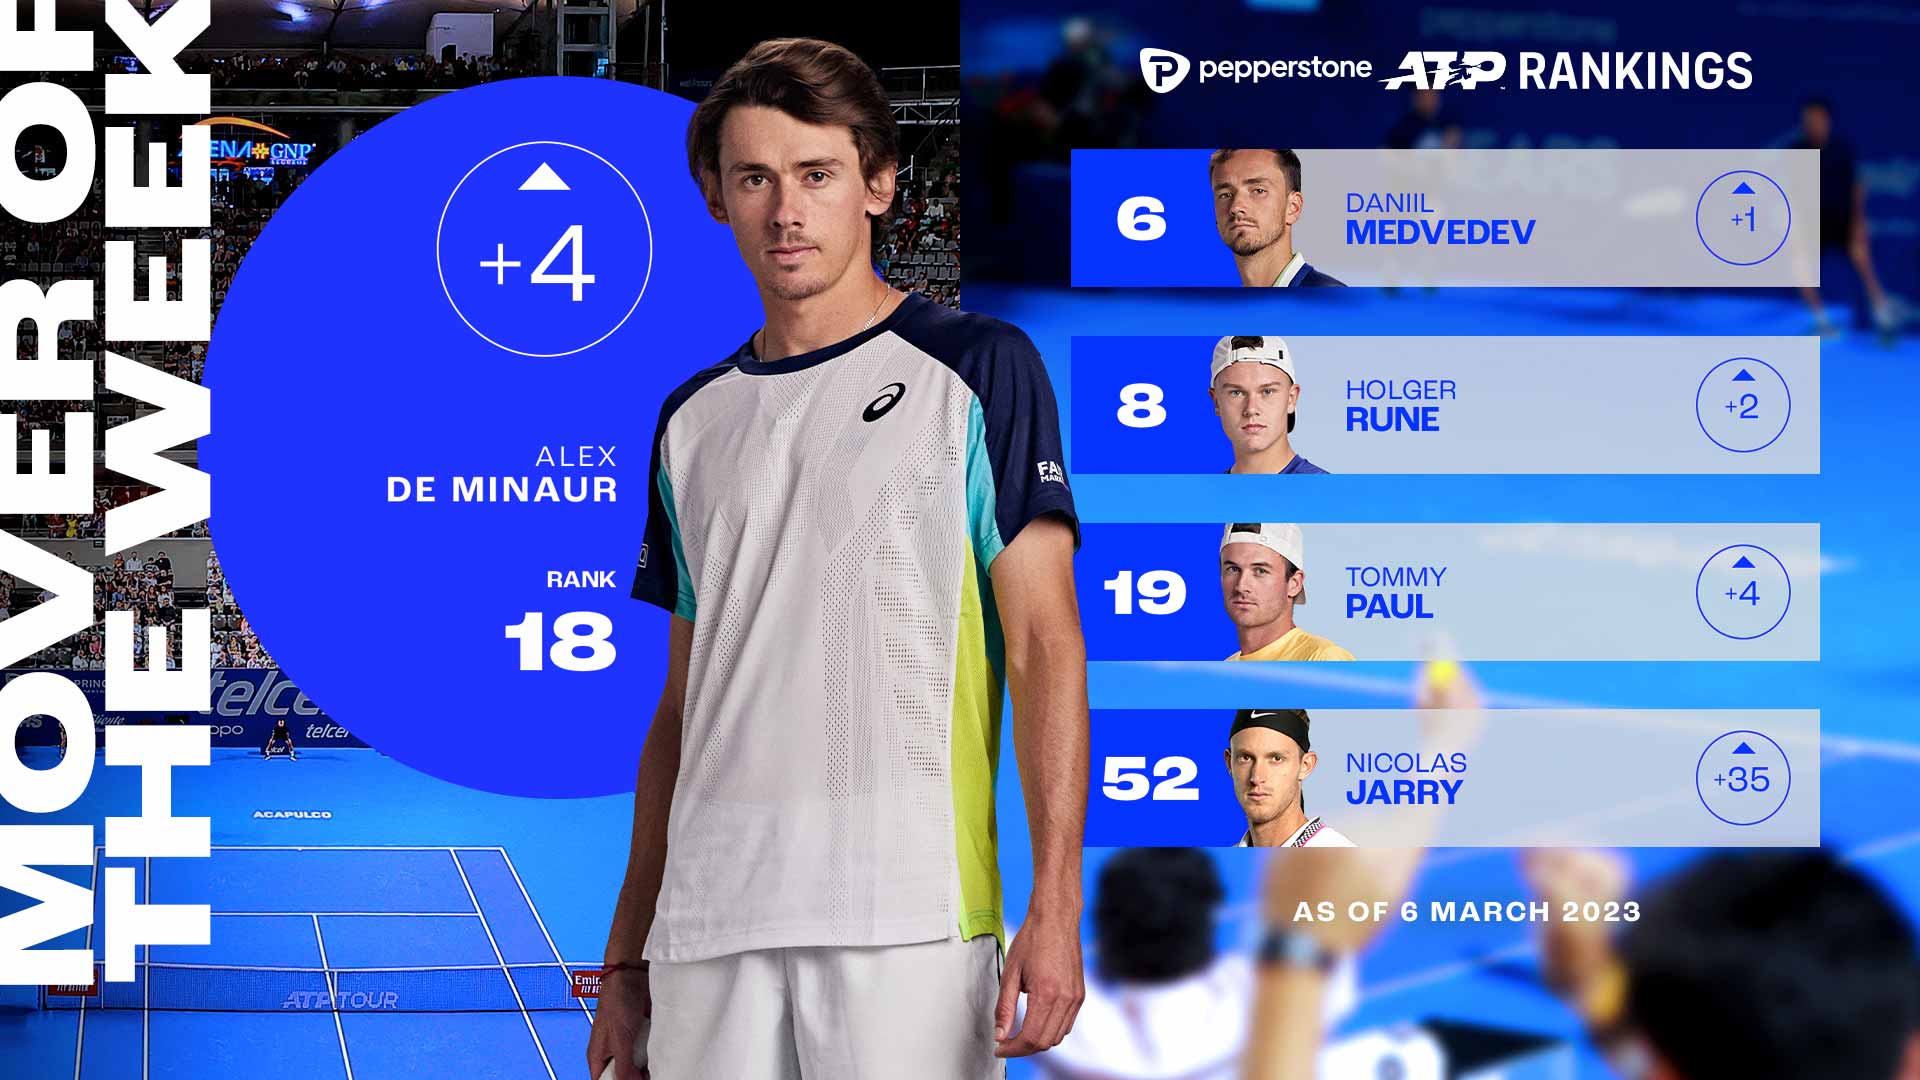 Acapulco champion Alex de Minaur has returned to the Top 20 for the first time since last August.